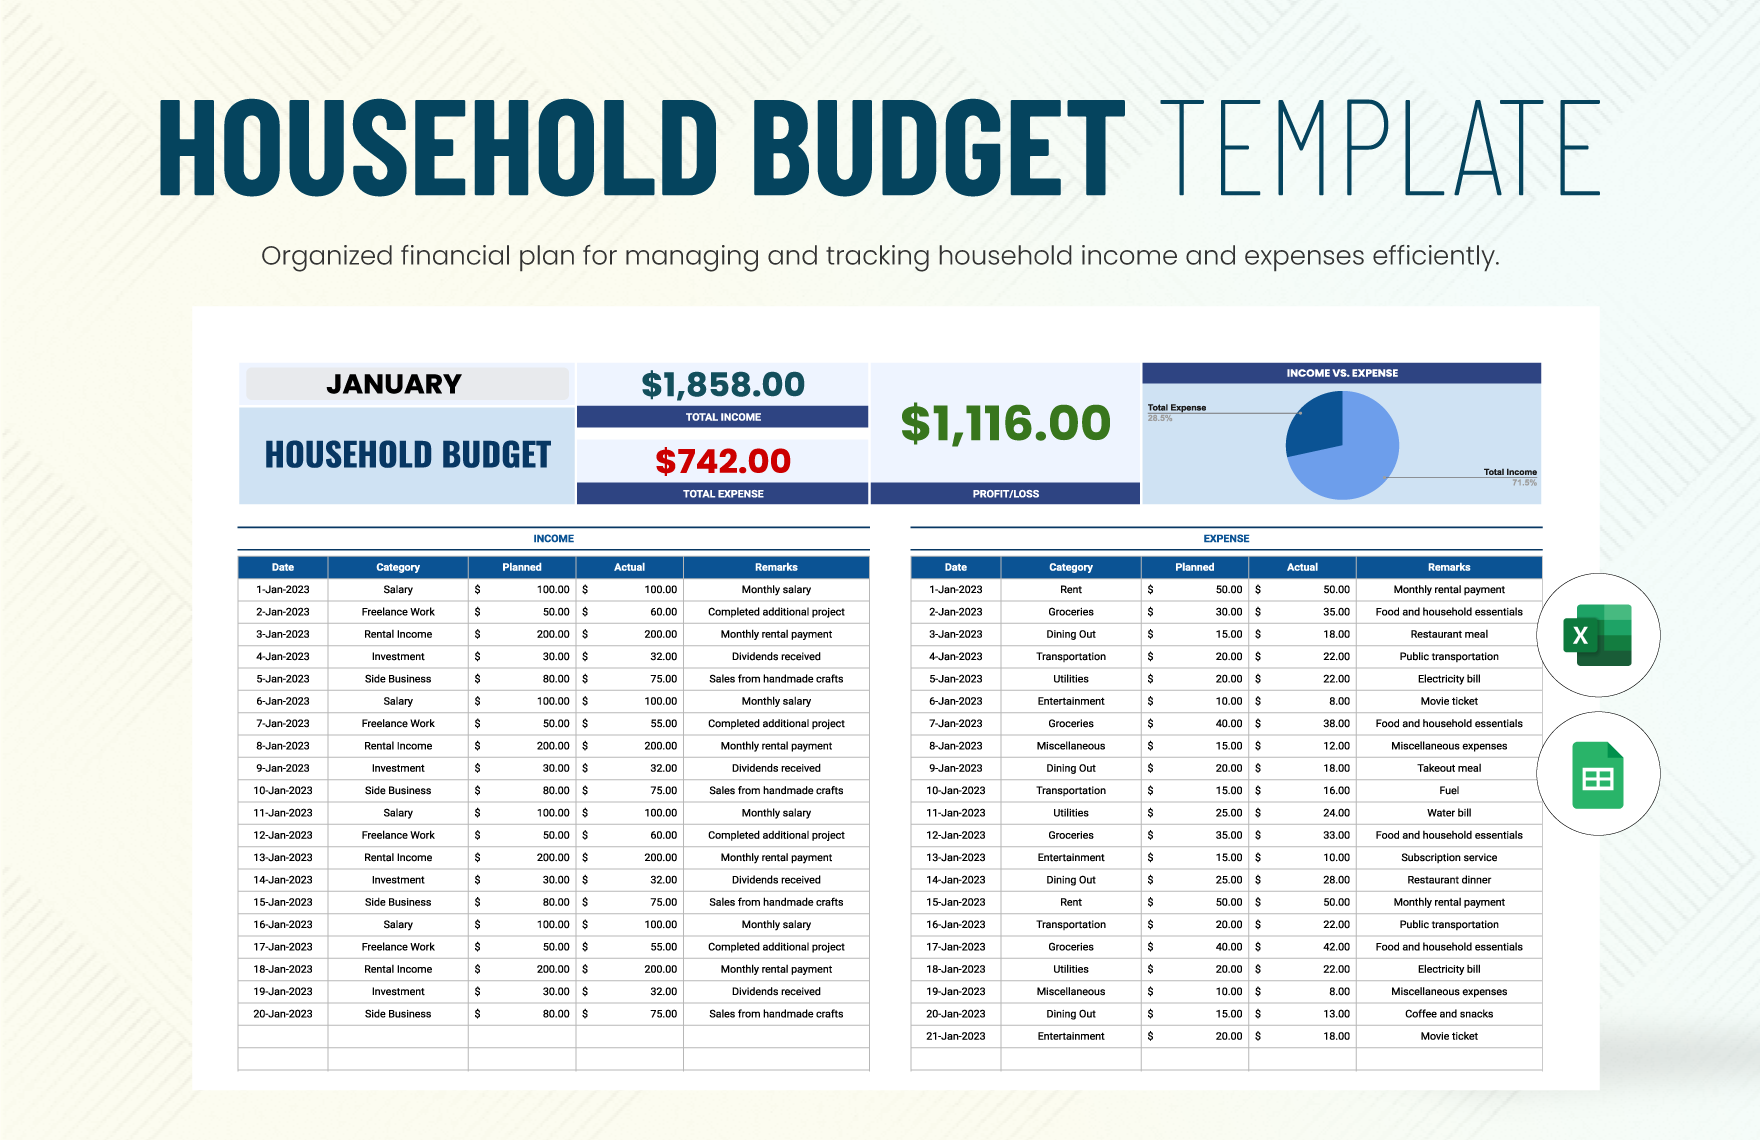 Household Budget Template in Excel, Google Sheets